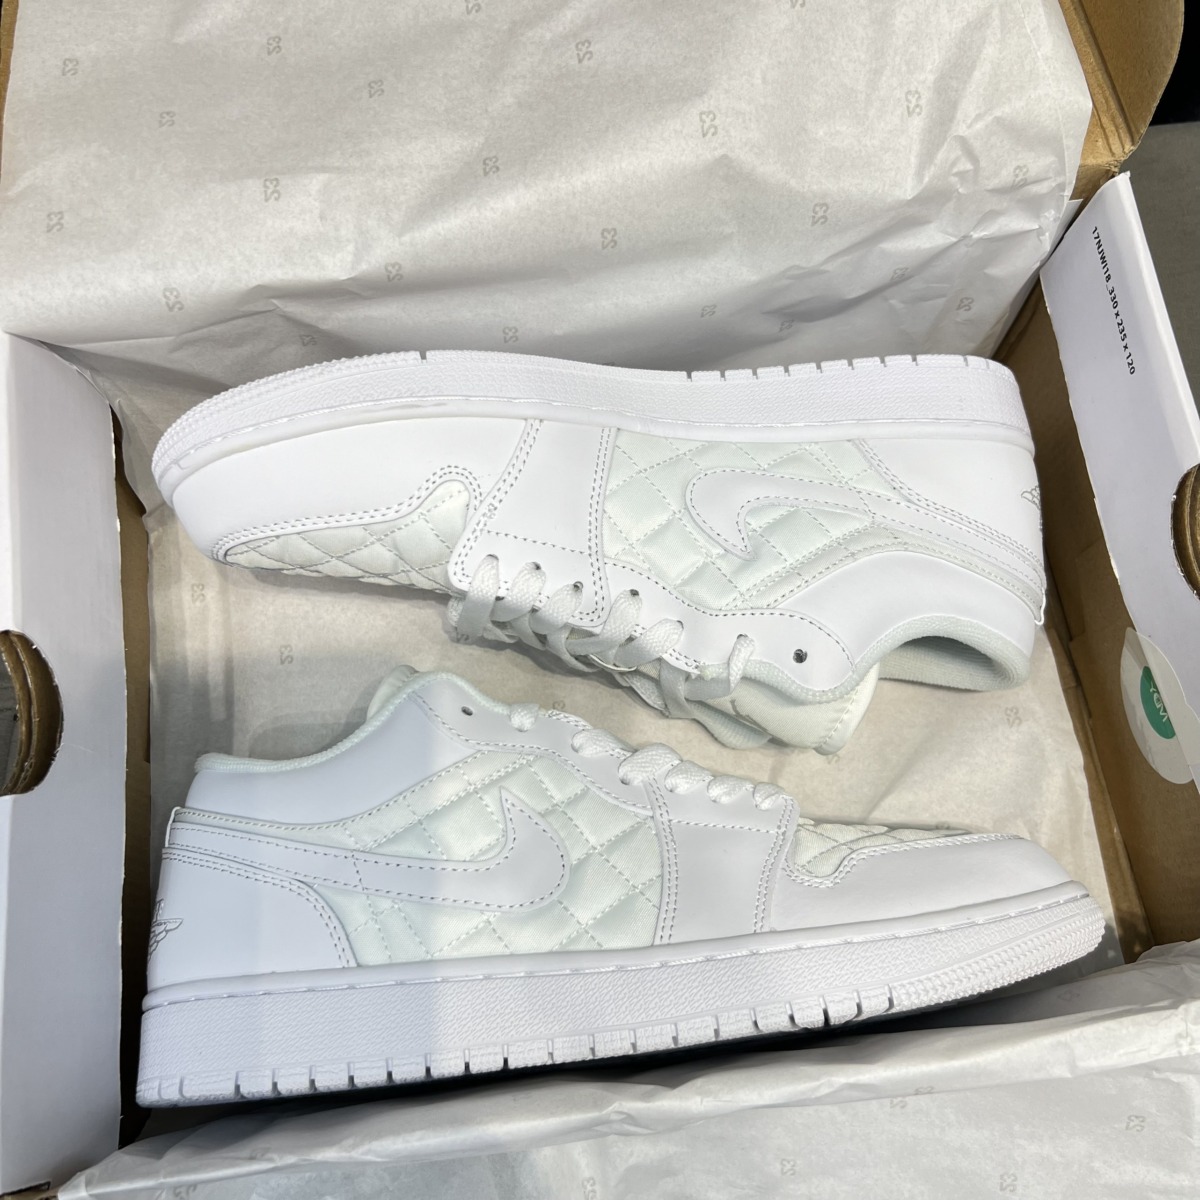 Giày Nike Air Jordan 1 Low Quilted ‘White’ Like Auth